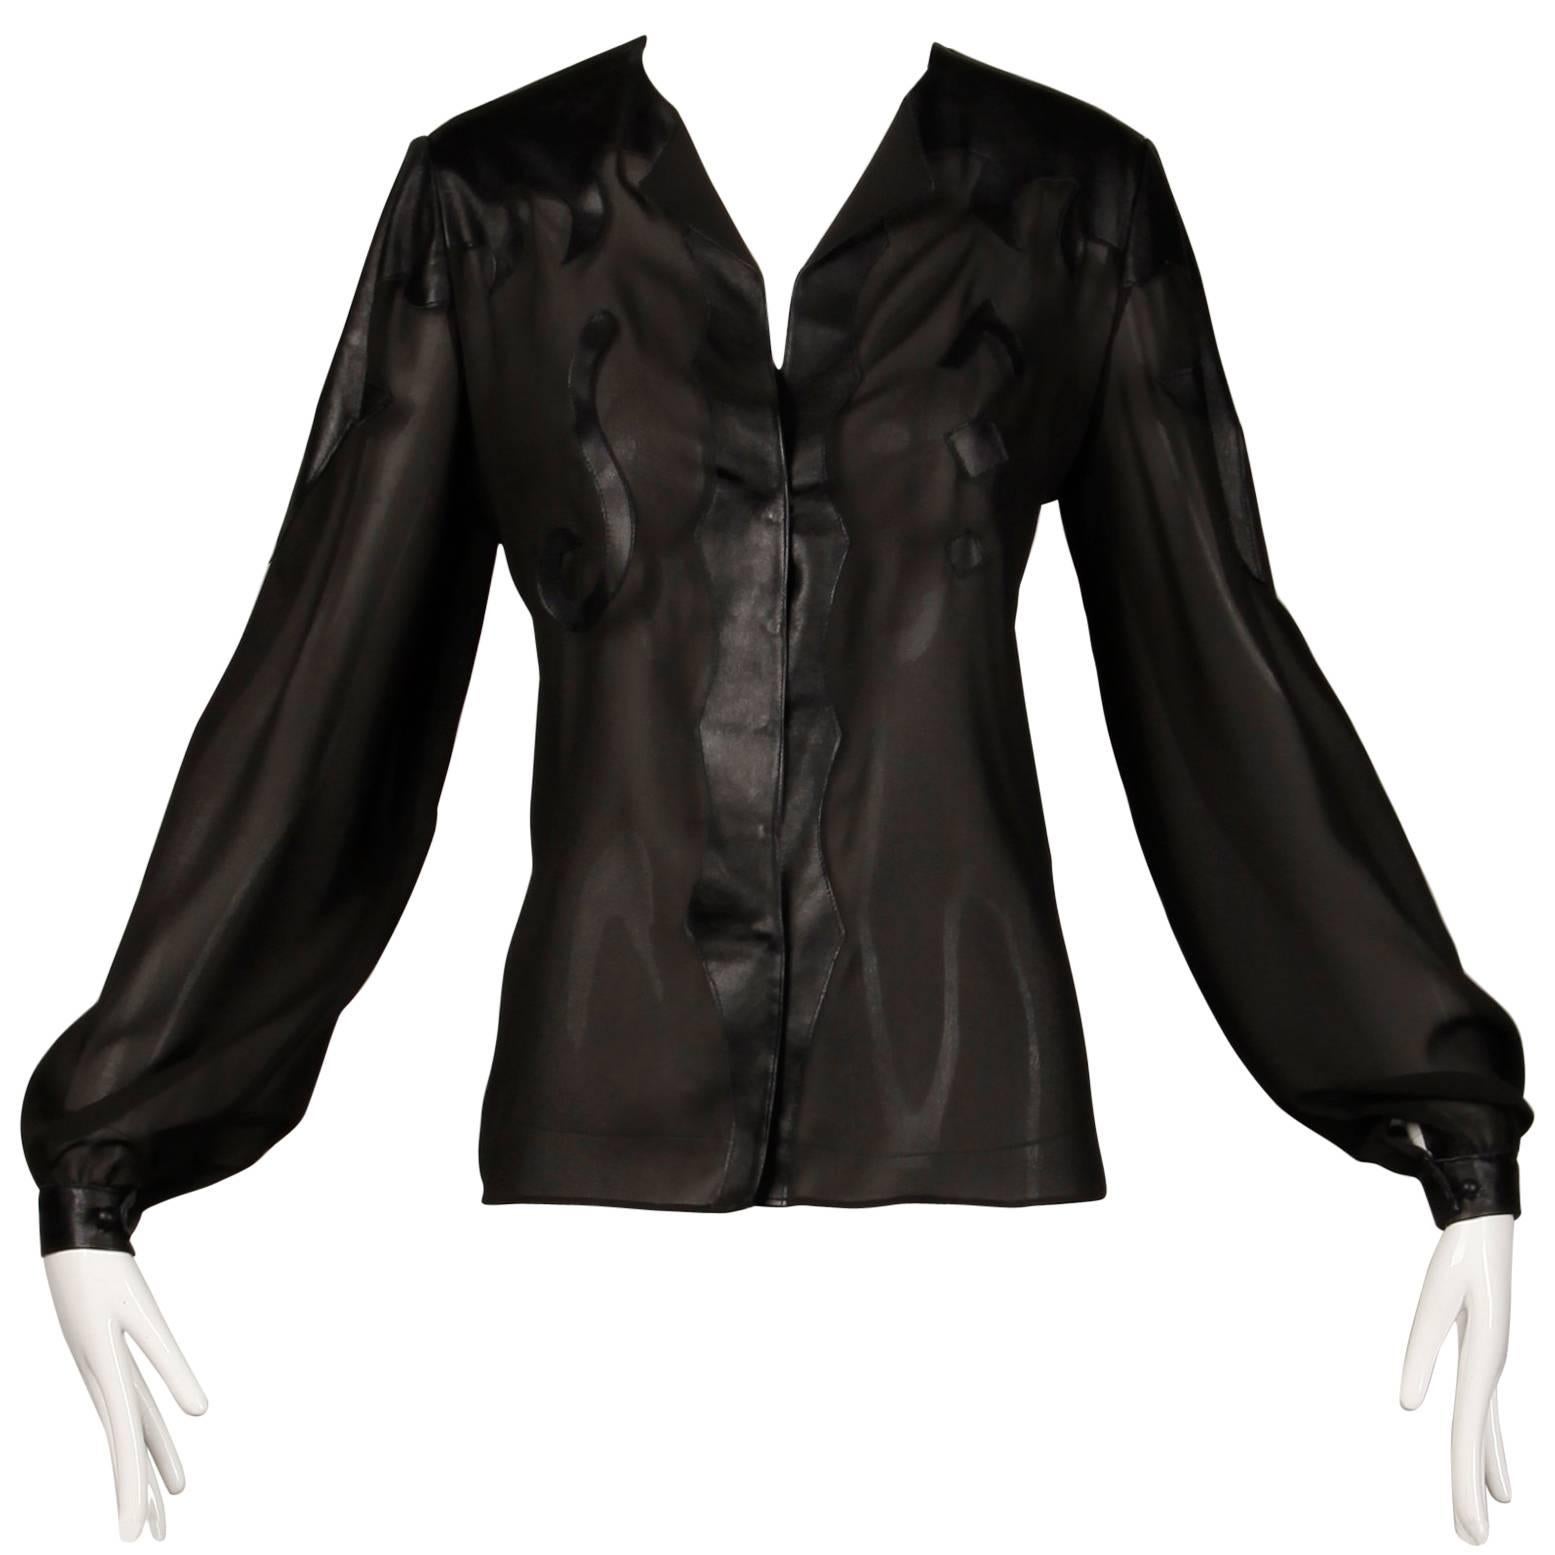 Giorgio Sant'Angelo 1970s Vintage Black Leather Patchwork Blouse, Top or Shirt